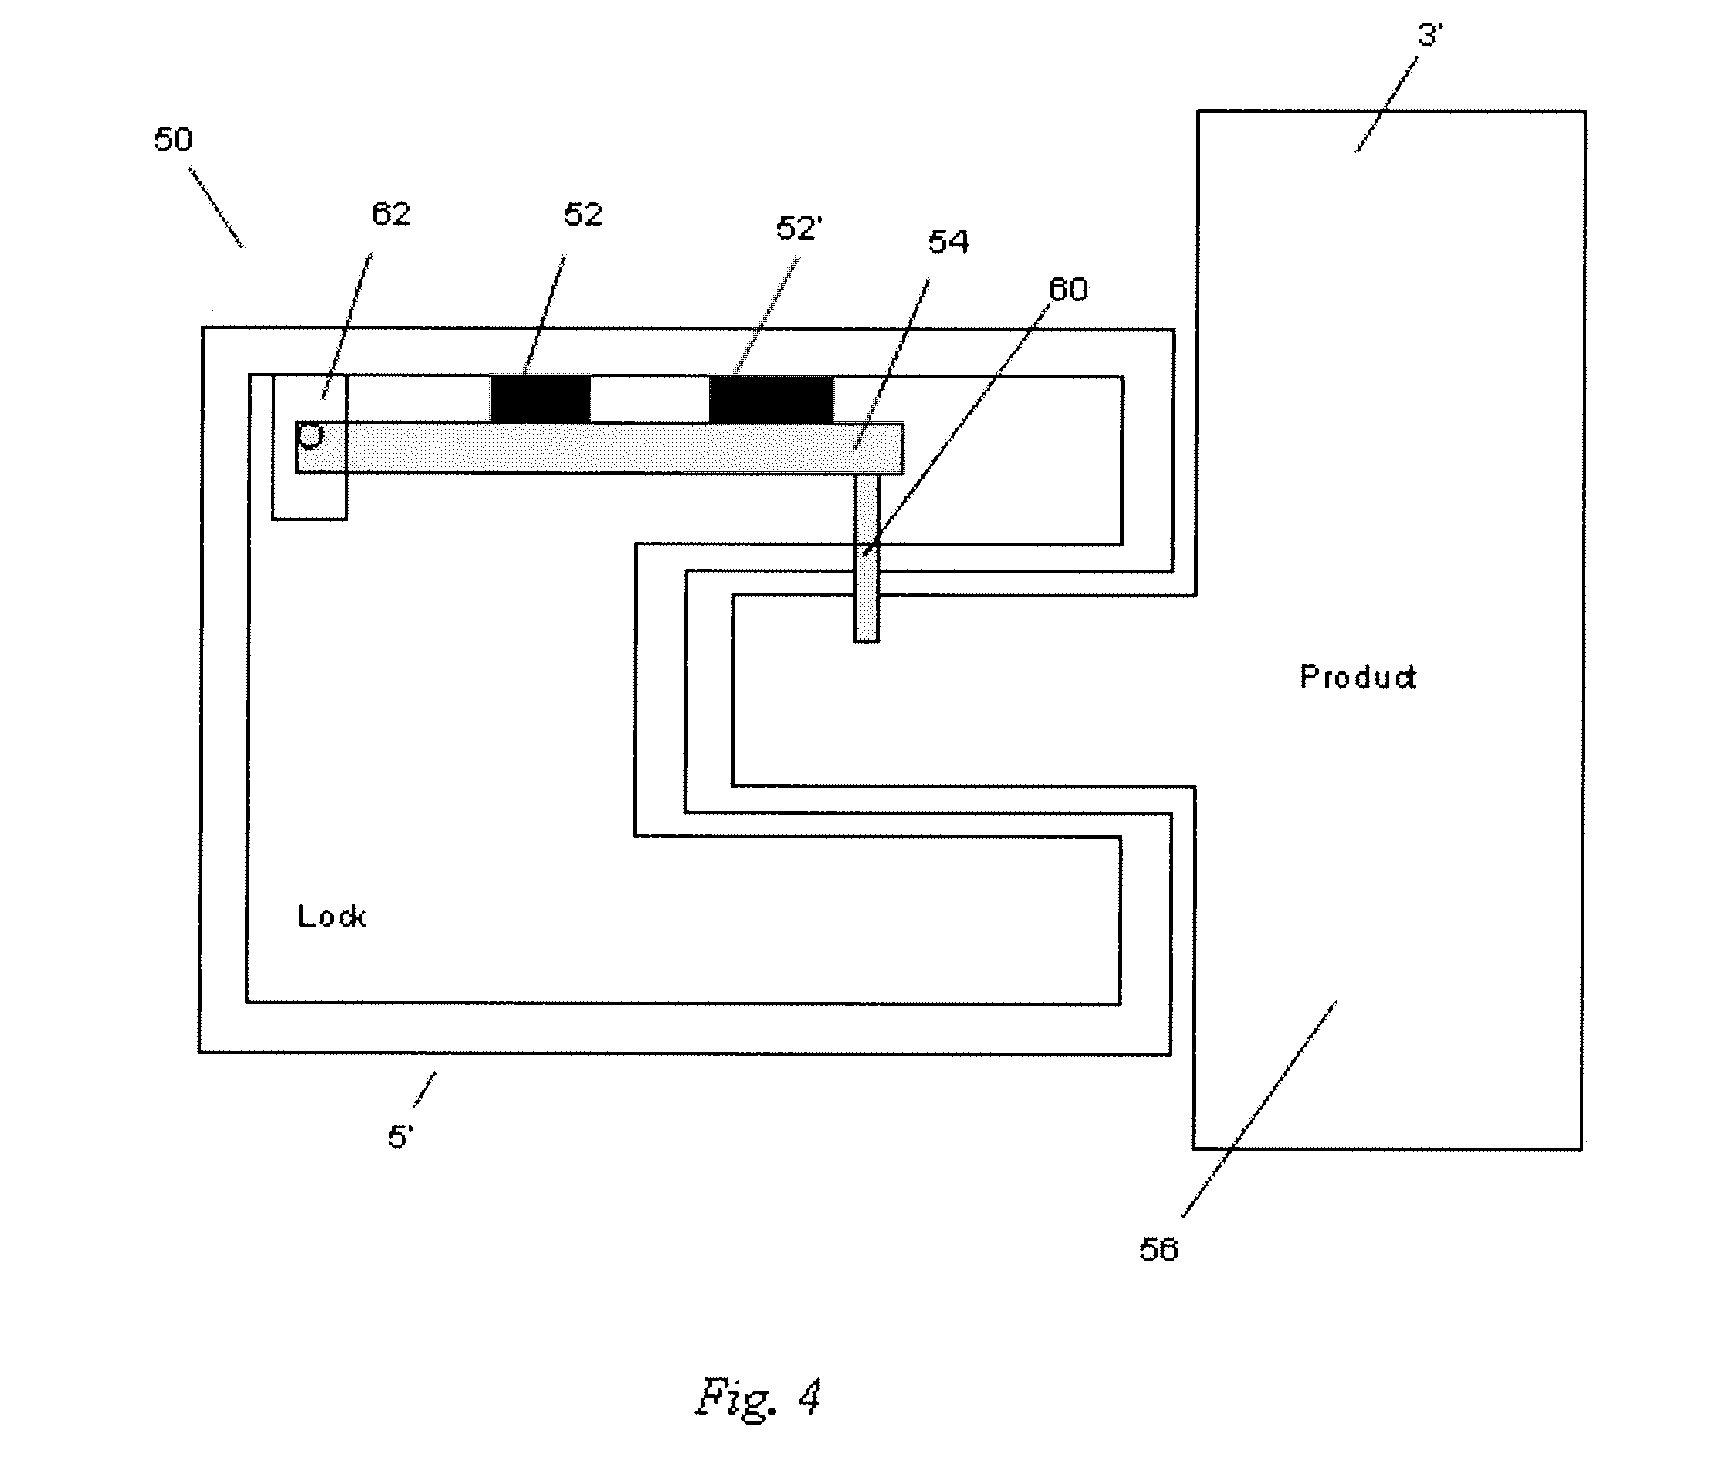 Remote-activation lock system and method